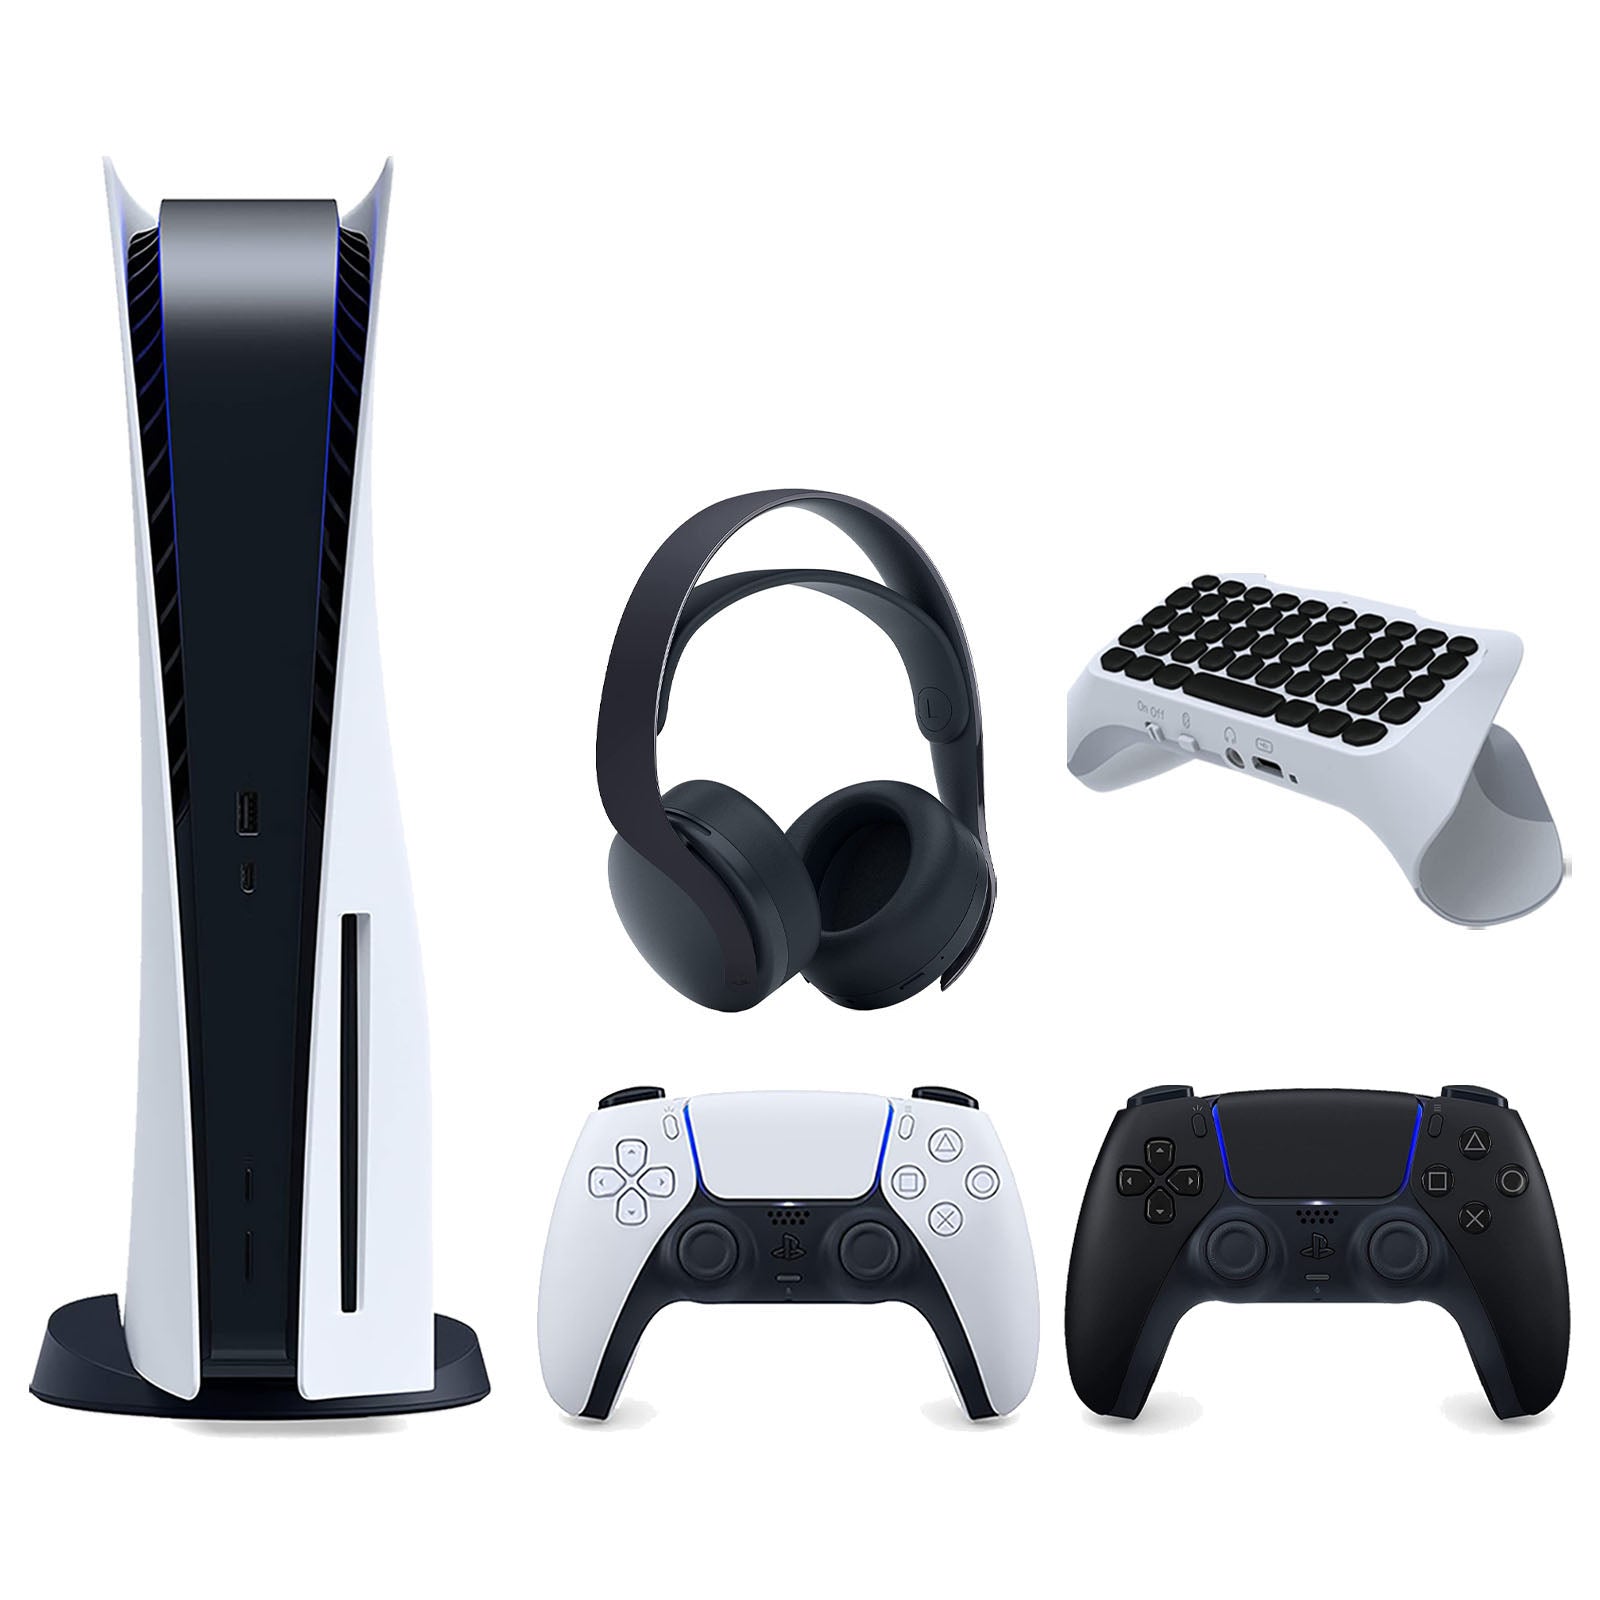 Sony Playstation 5 Disc Version Console with Extra Black Controller, Black PULSE 3D Headset and Surge QuickType 2.0 Wireless PS5 Controller Keypad Bundle - Pro-Distributing